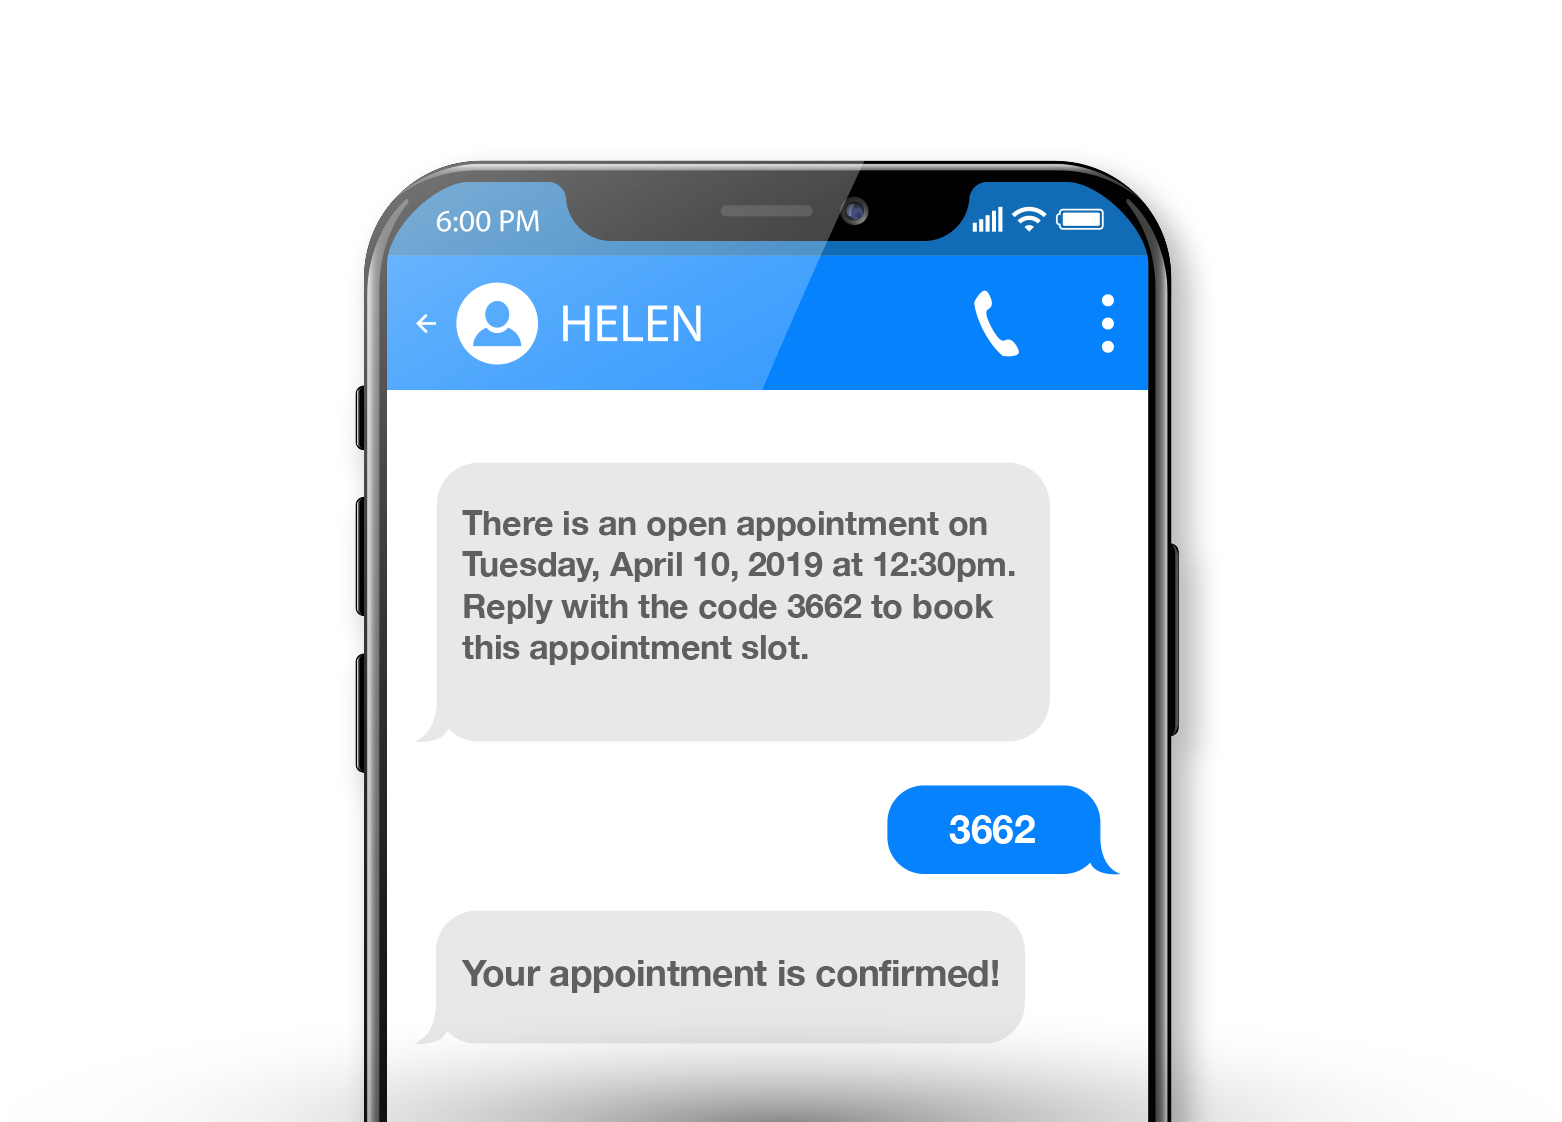 Smartphone screen showing a telehealth appointment